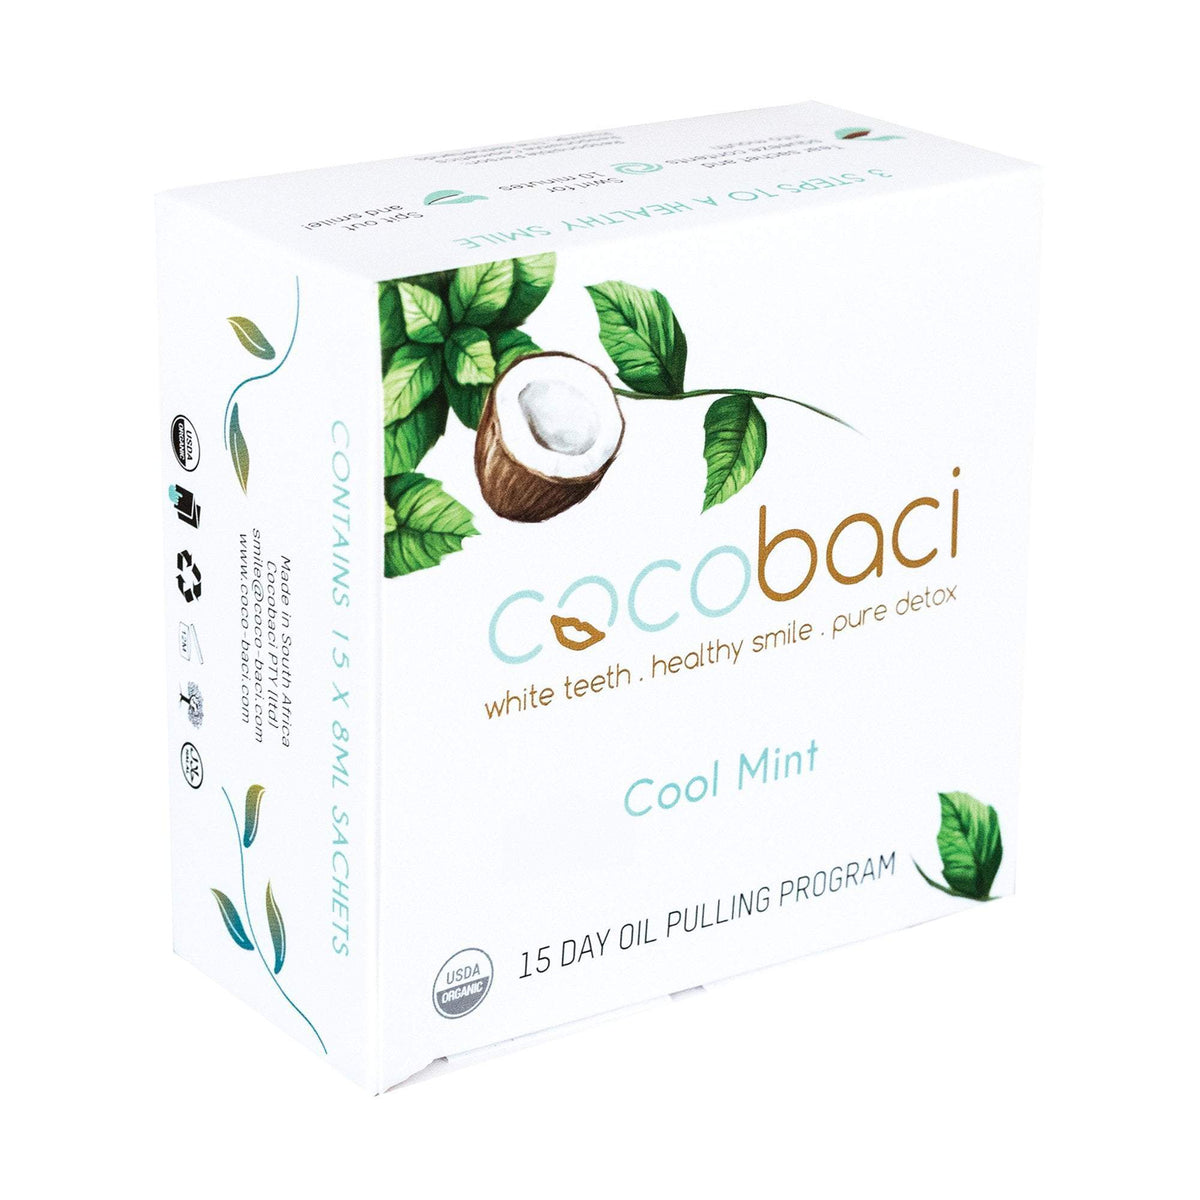 Cocobaci Cool Mint 15 Day Oil Pulling Program